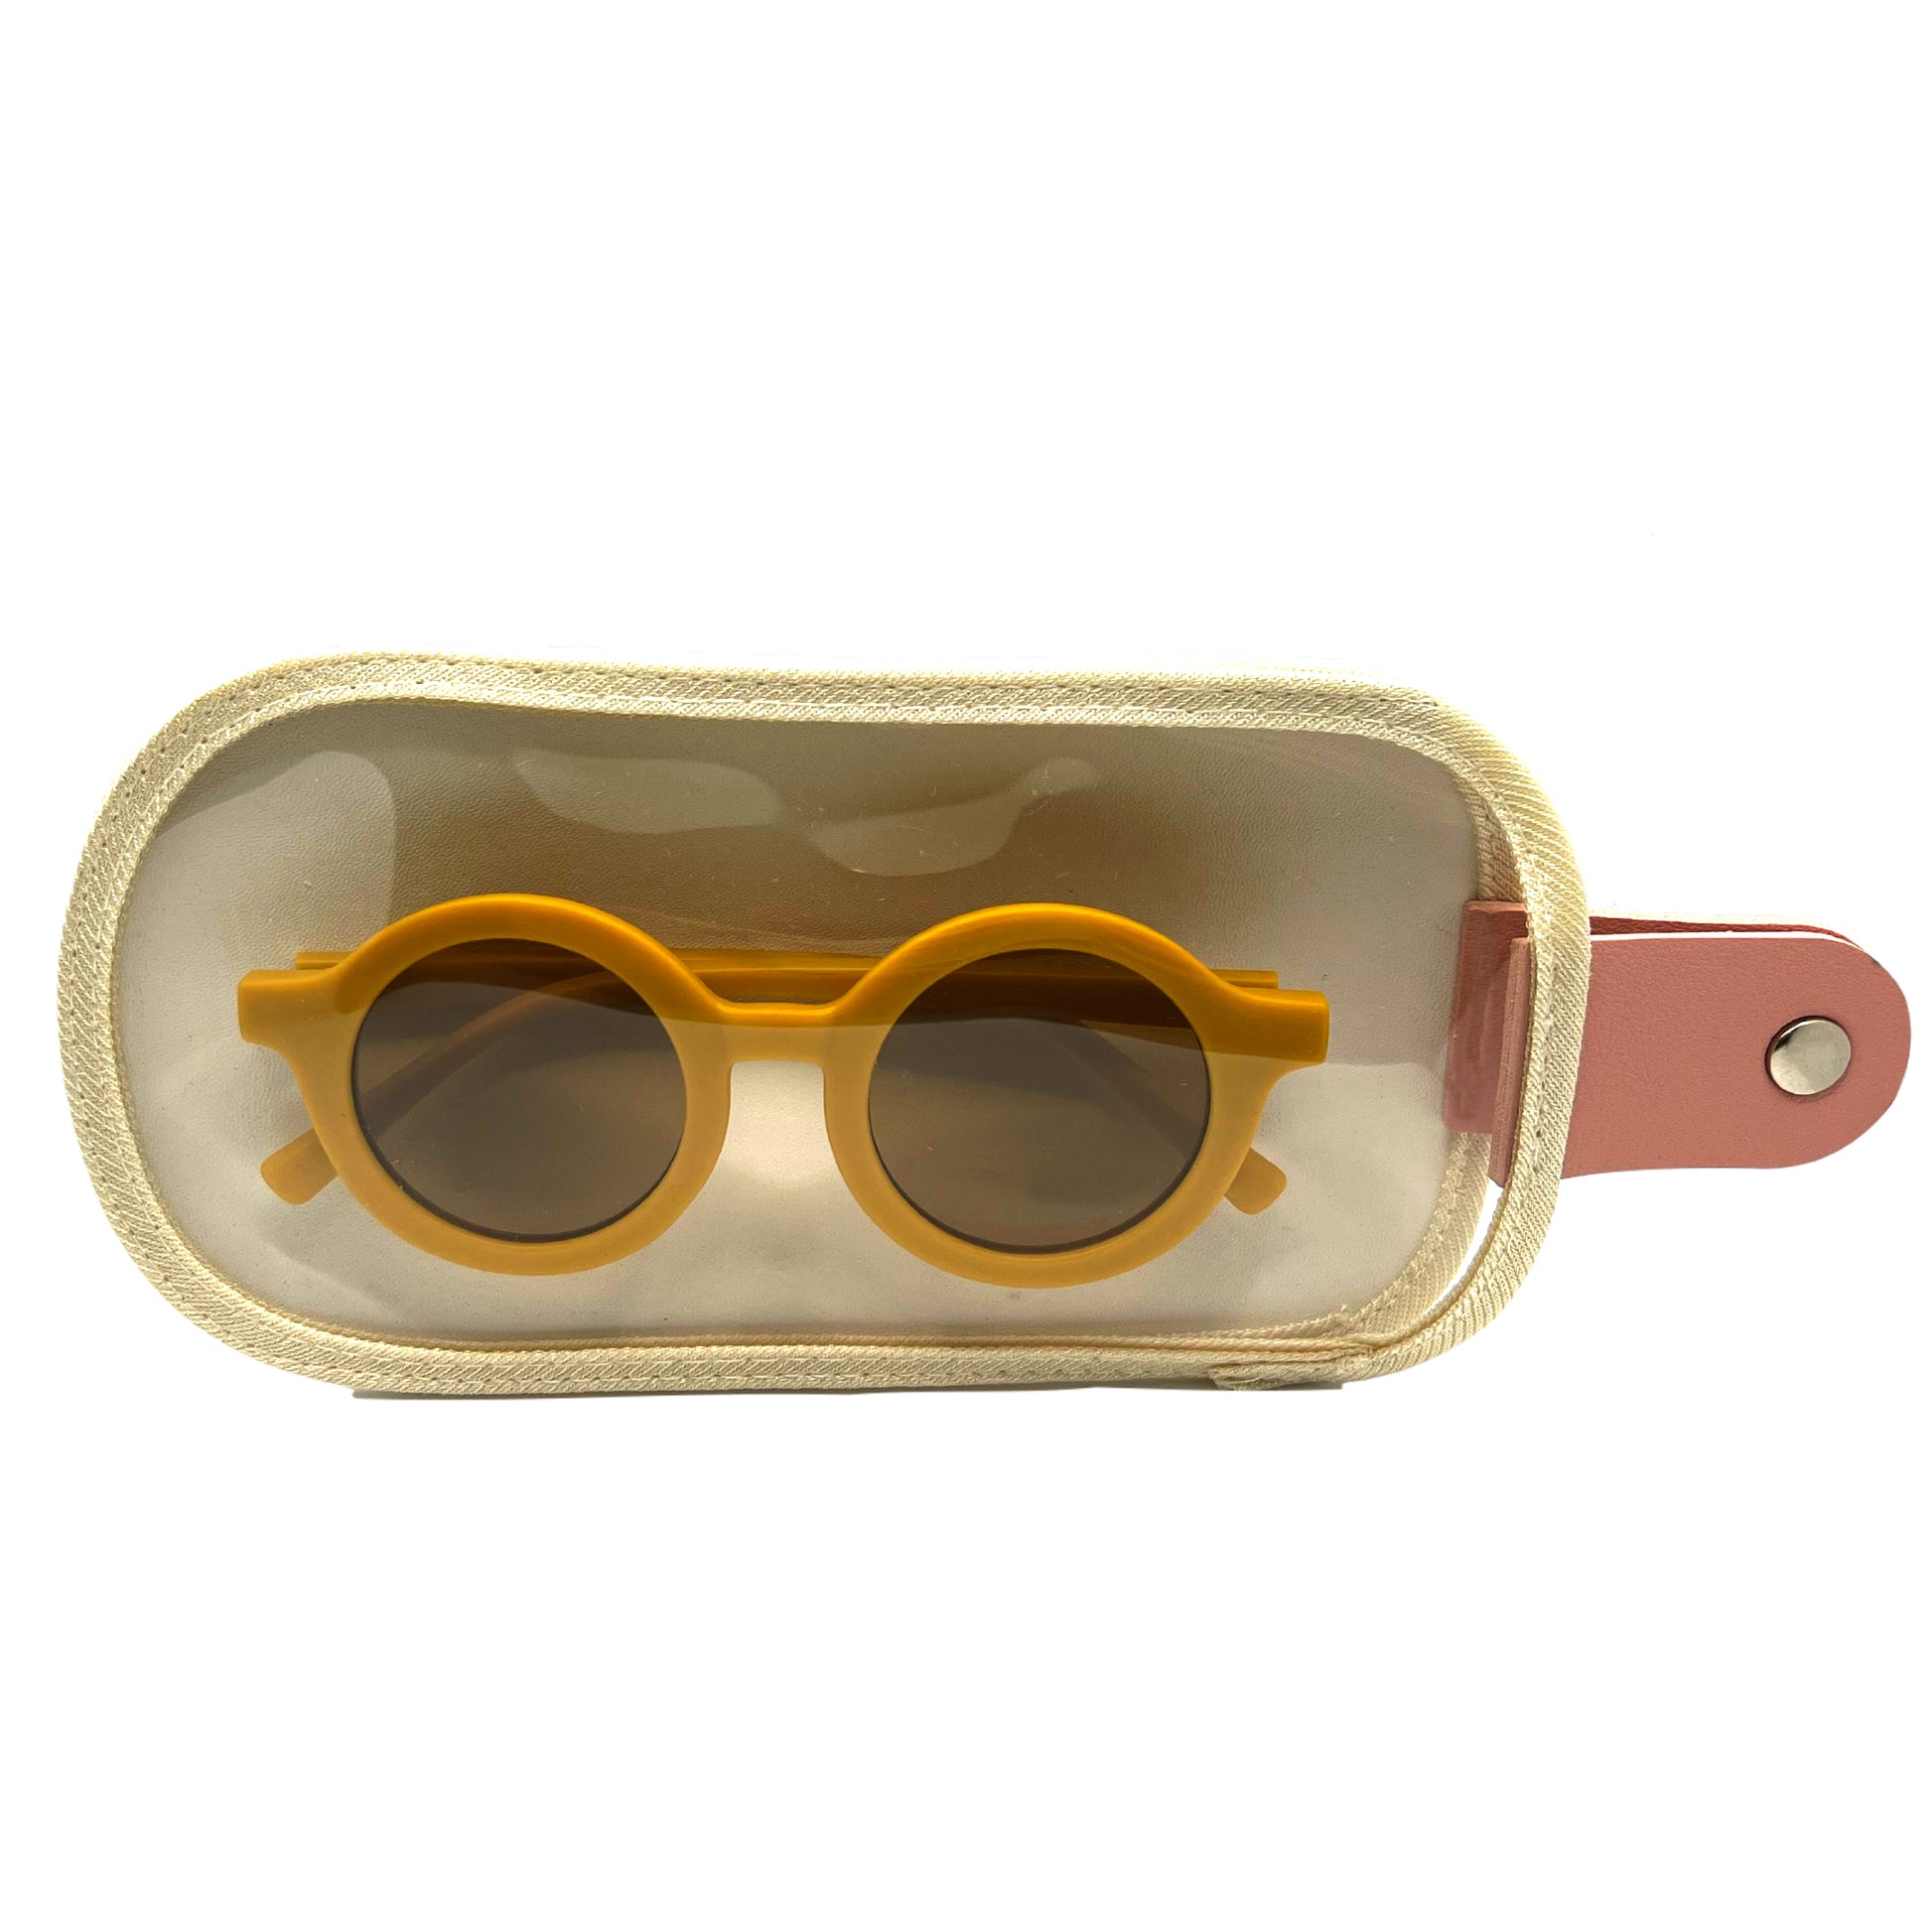 Bprotectedstore Sosy Mustard Kids and Toddlers Sunglasses-Lifestyle-Pack